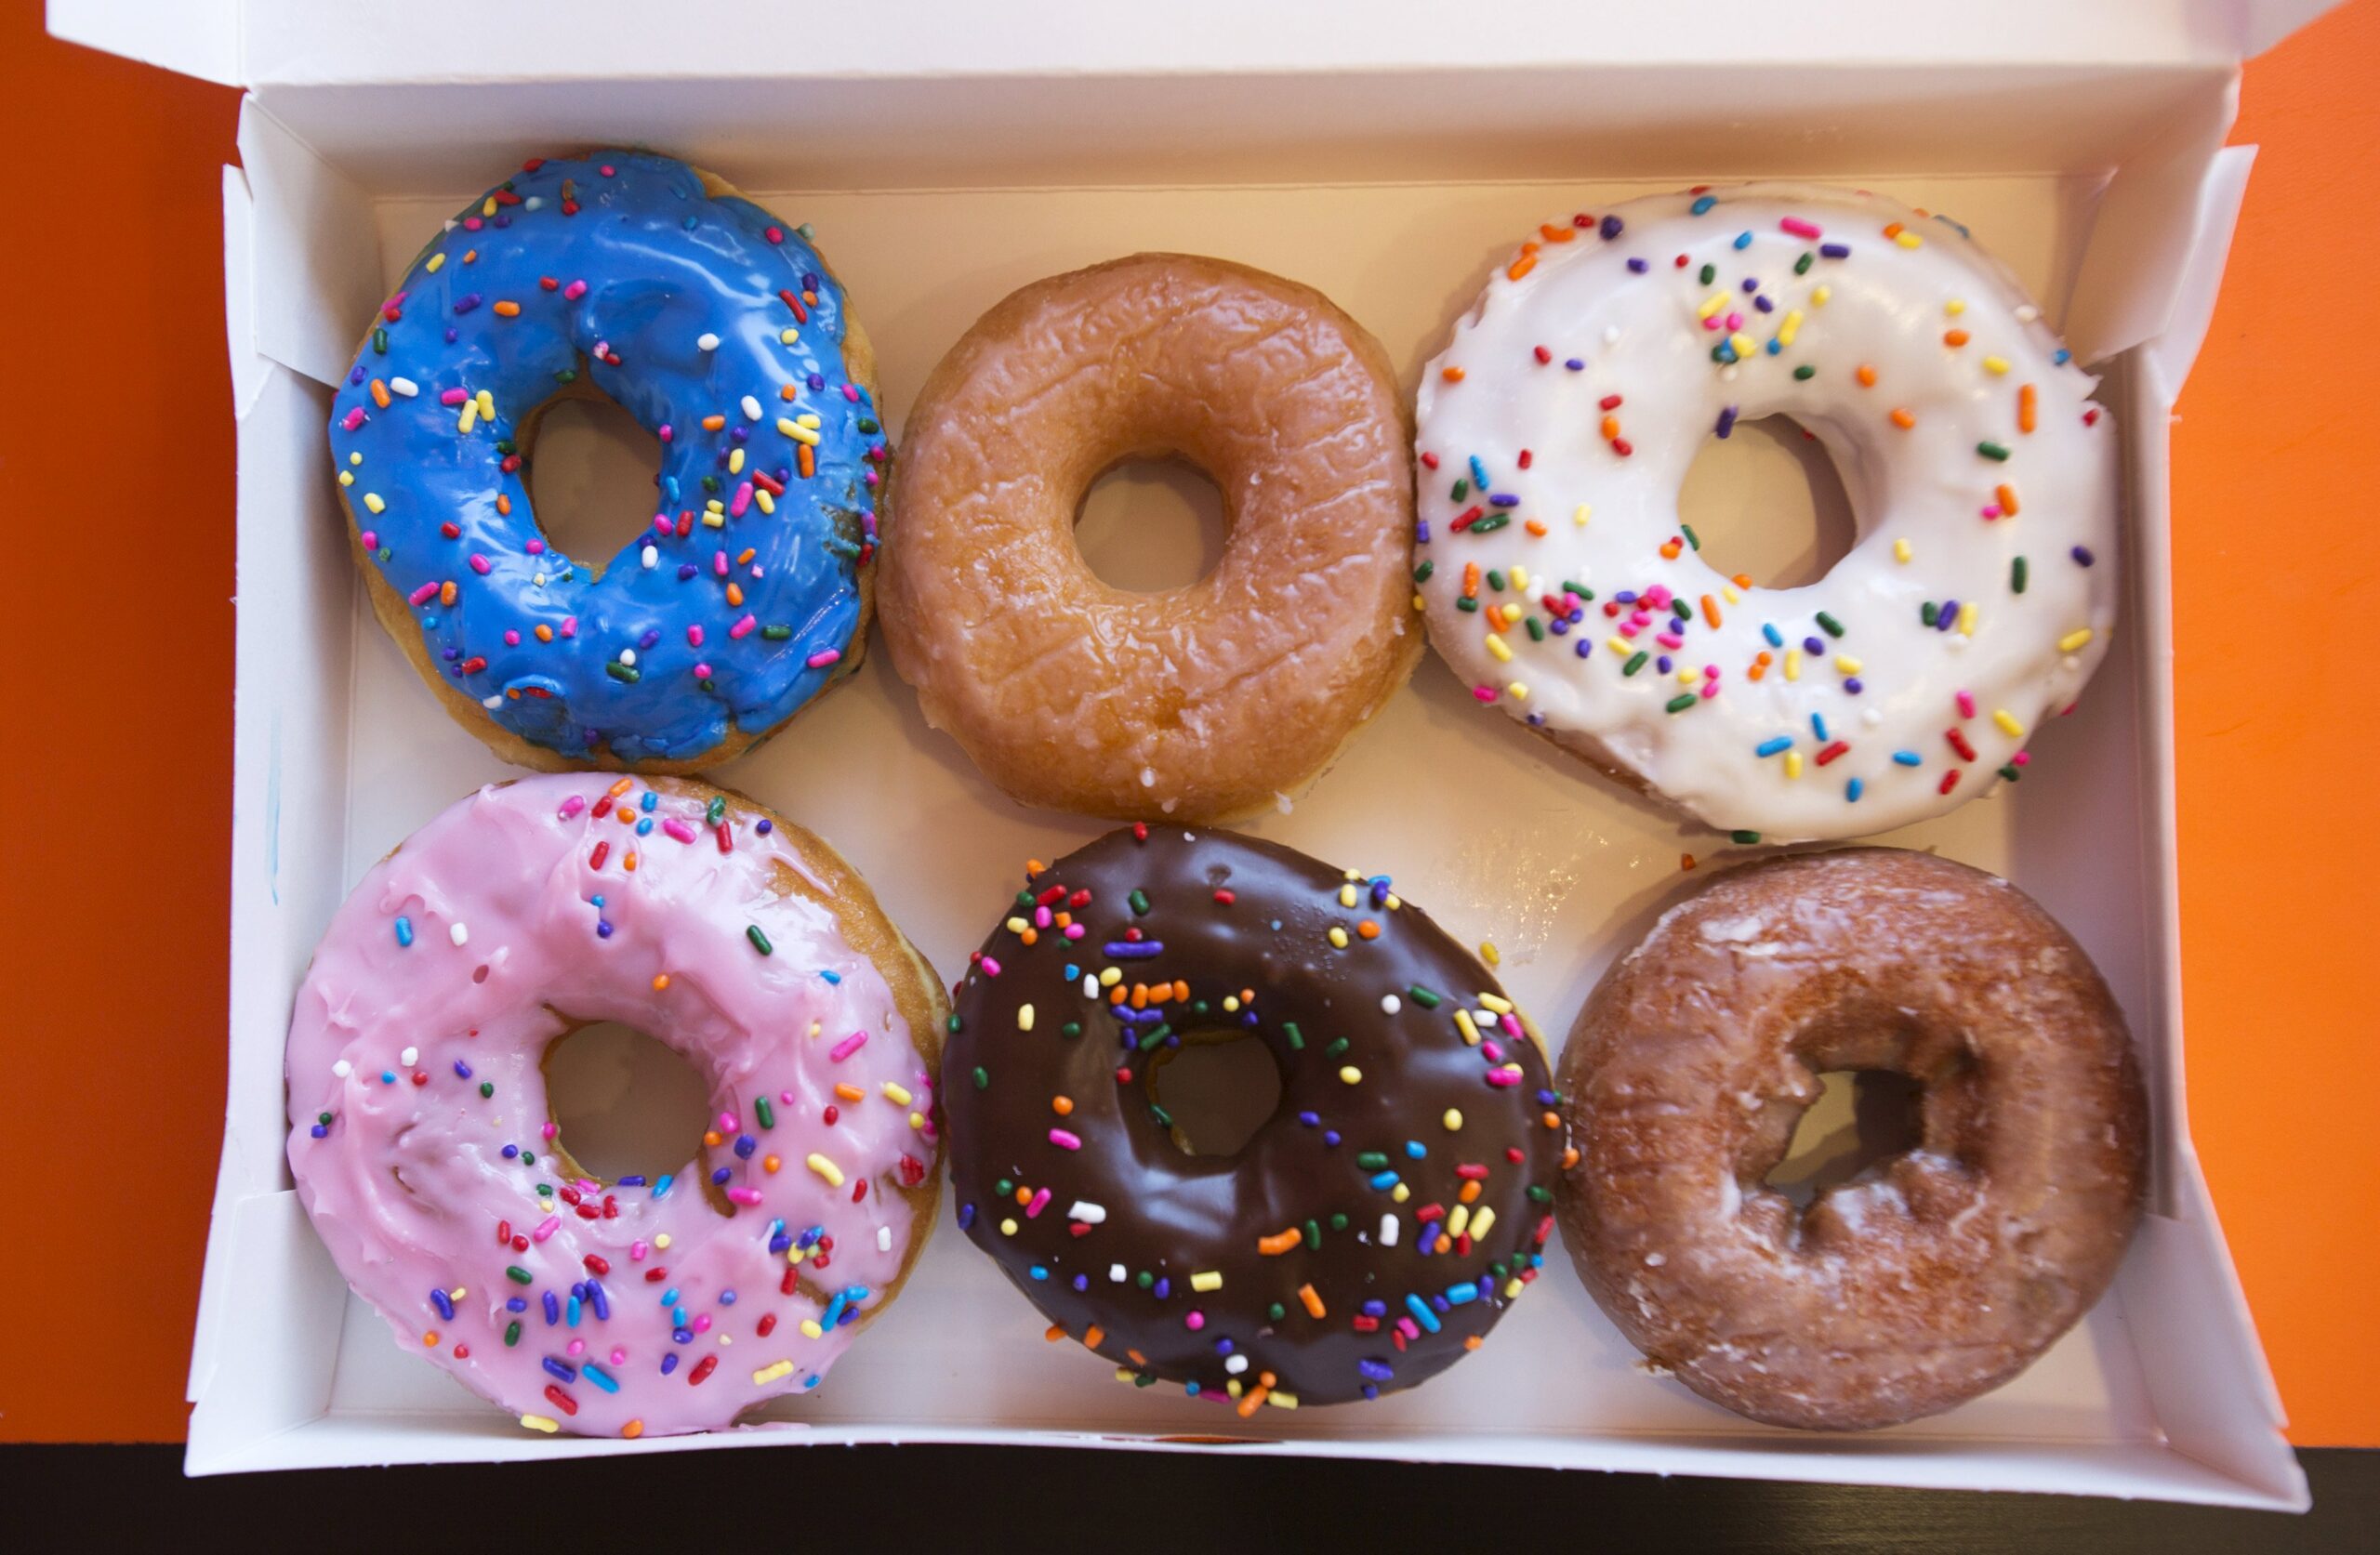 What new items are at Dunkin Donuts?